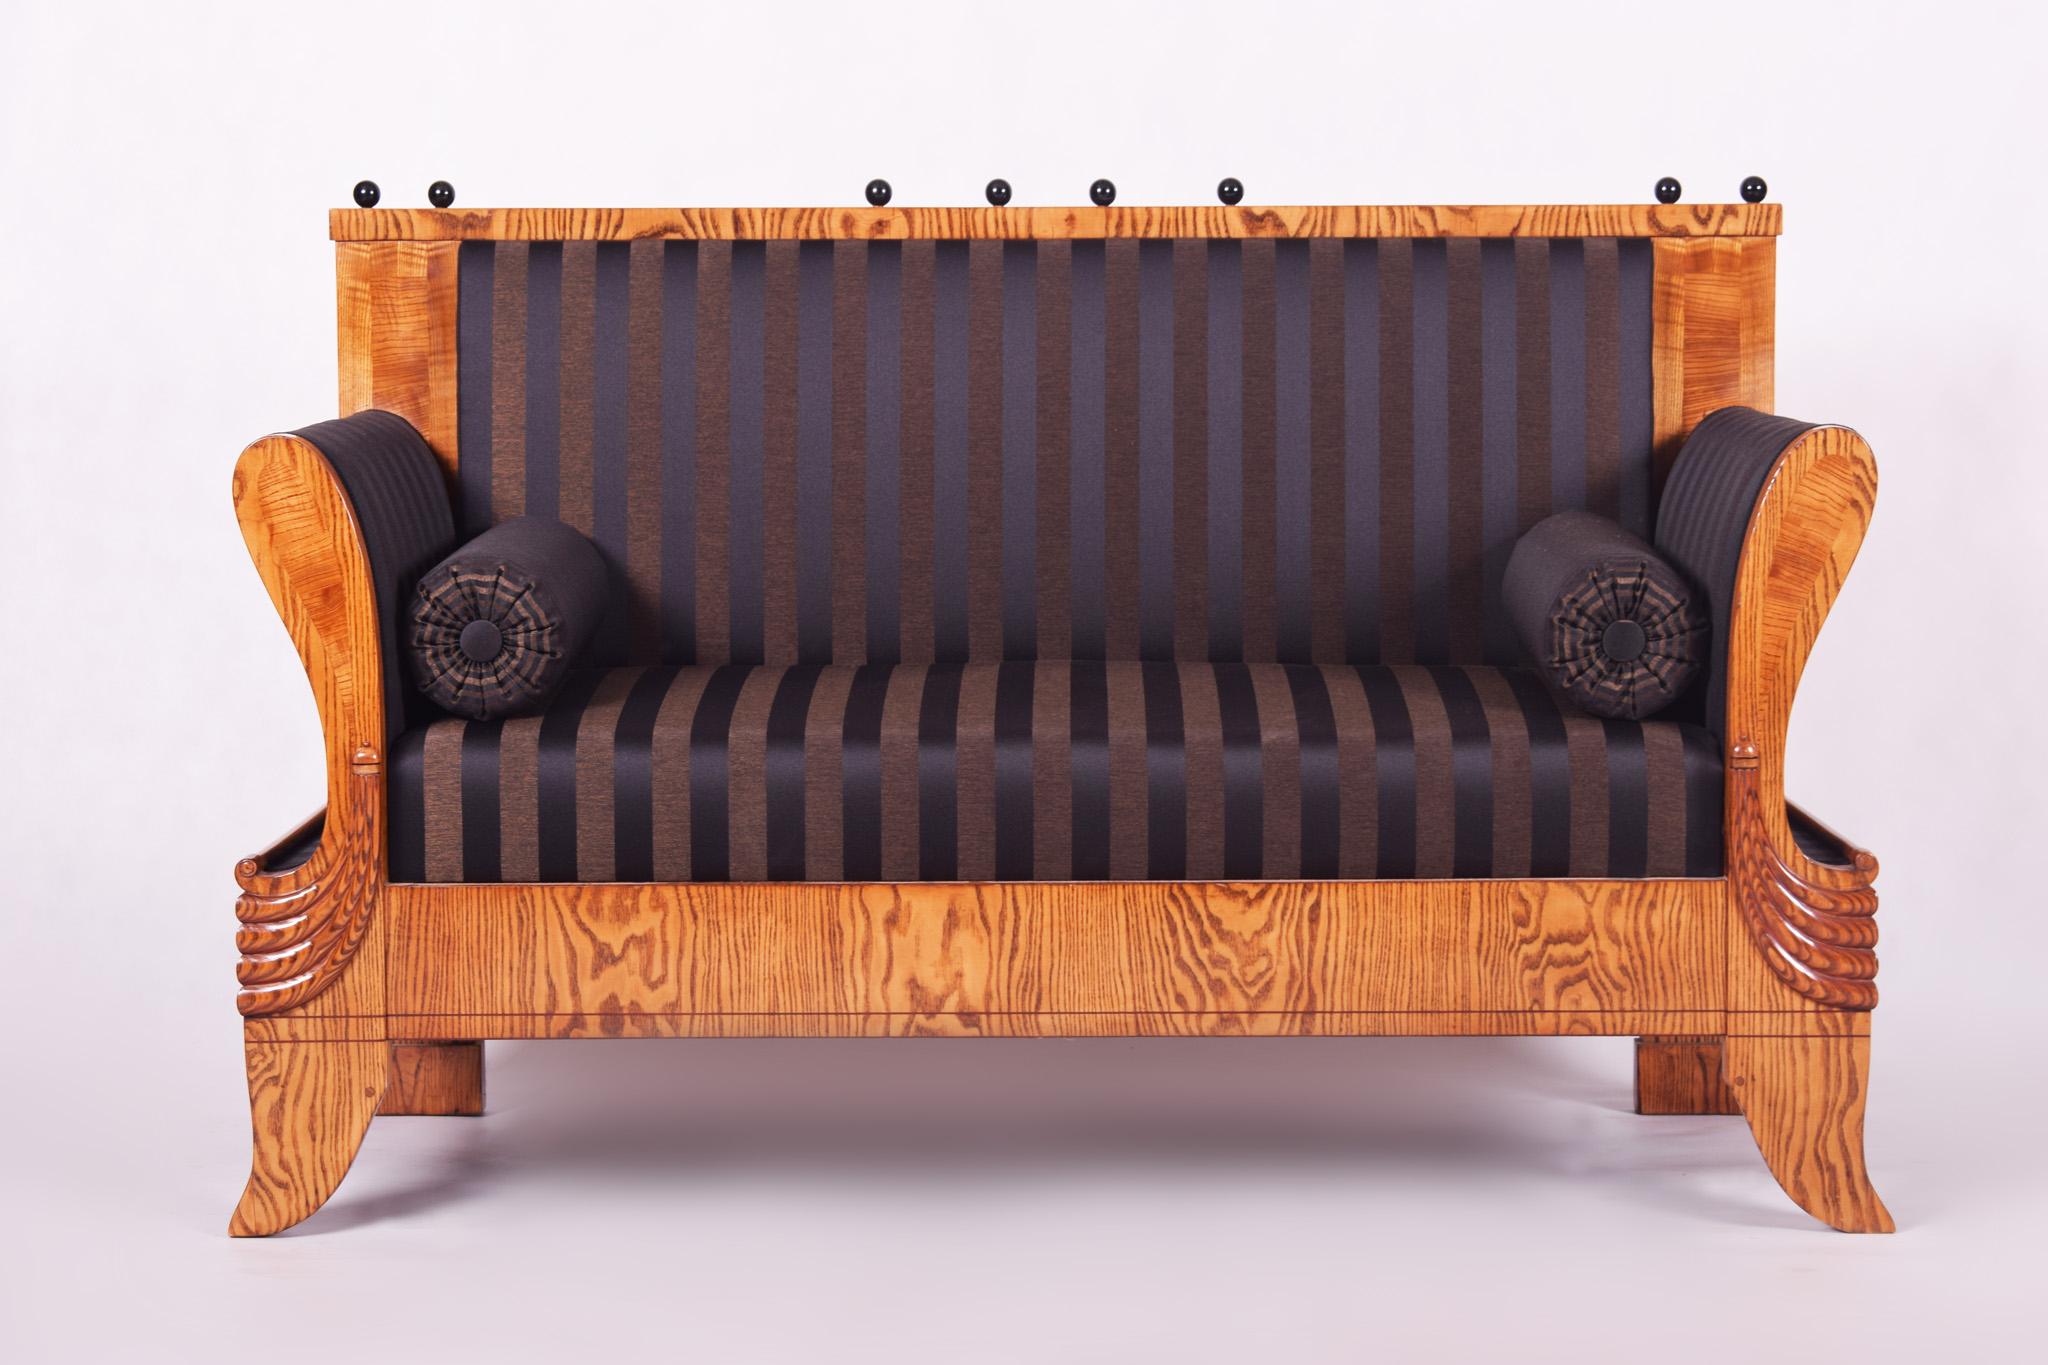 Biedermeier sofa
Completely restored, new upholstery included
Shellac polish.
Source: Czech
Period: 1830-1839.